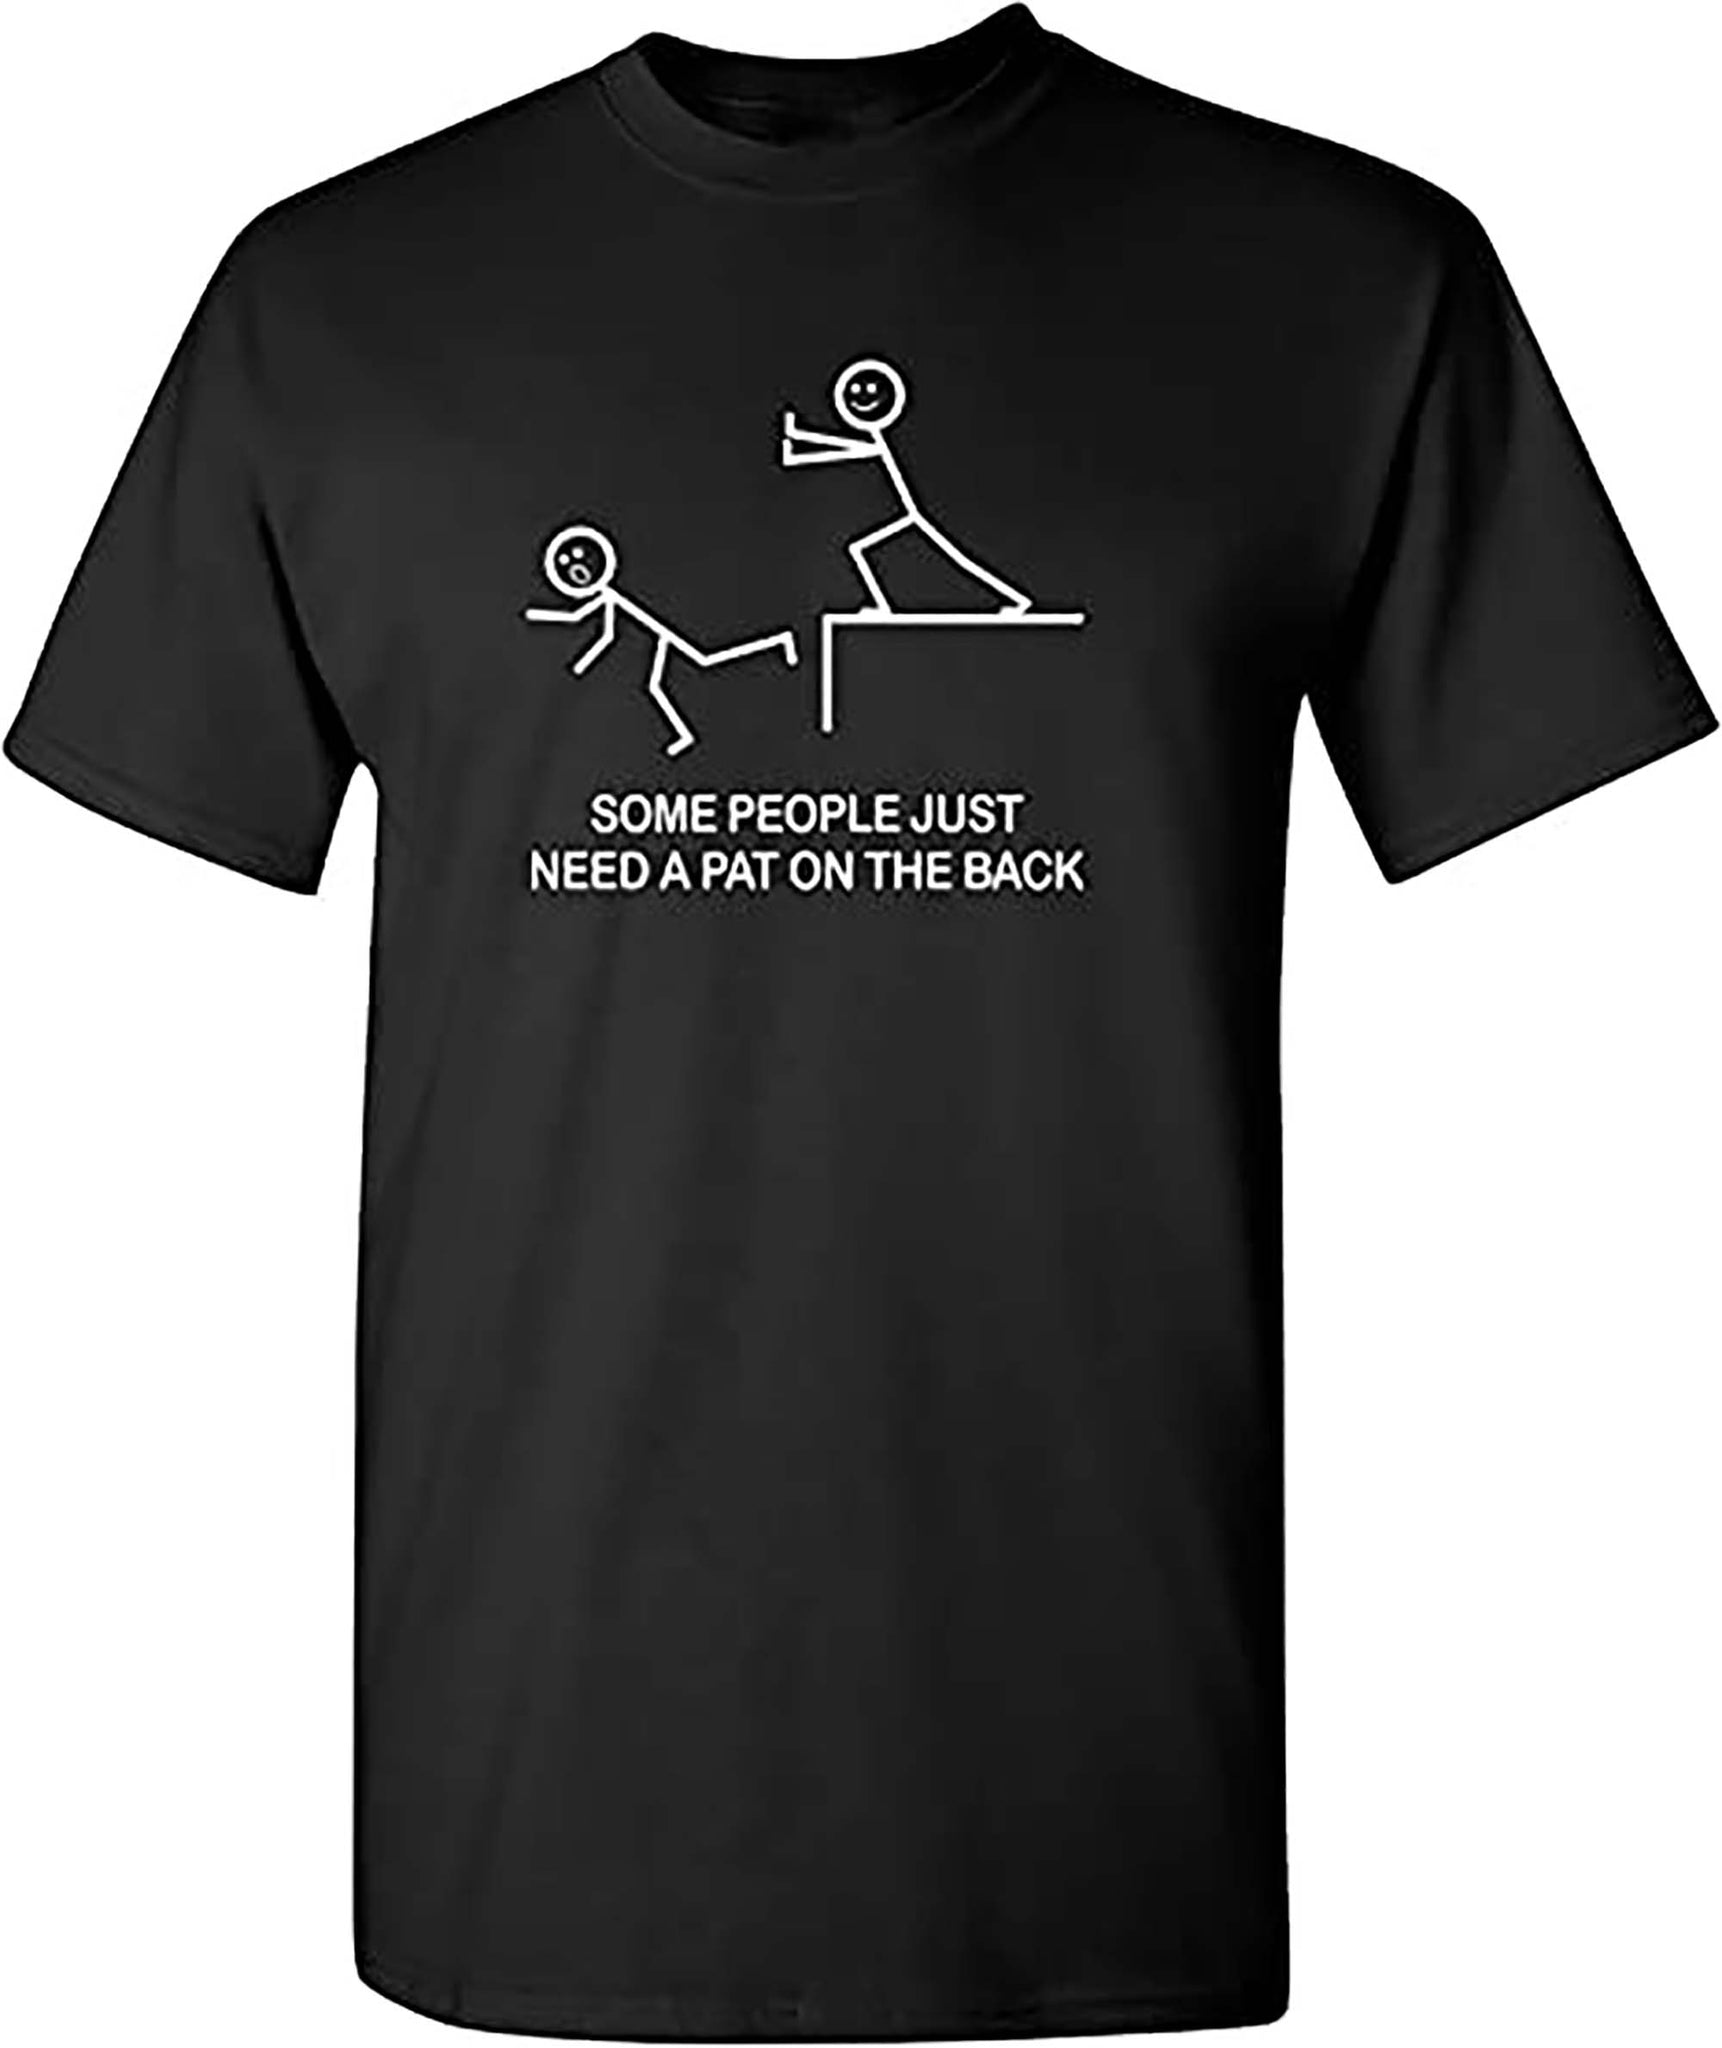 Some People Just Need A Pat On The Back Adult Humor Sarcasm Mens Funny T Shirt-Black